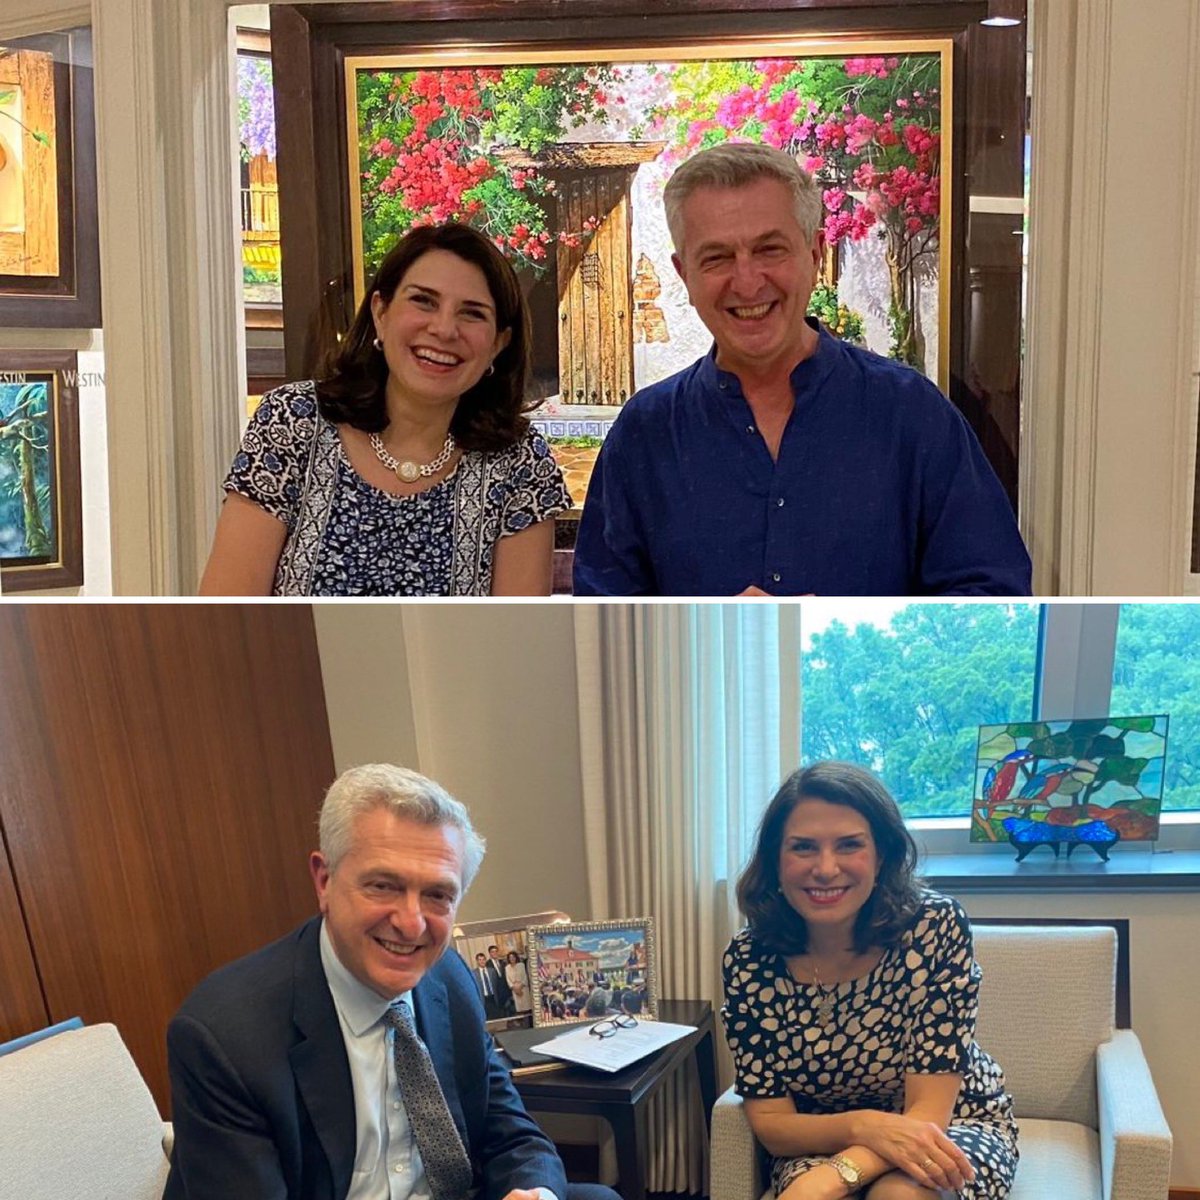 Much interaction this week between @StatePRM and UNHCR on how to address the plight of refugees, displaced and stateless people: from a conference in Guatemala to wide ranging discussions in Washington DC. Thank you @PRMAsstSec Julieta Valls Noyes for your friendship and support.